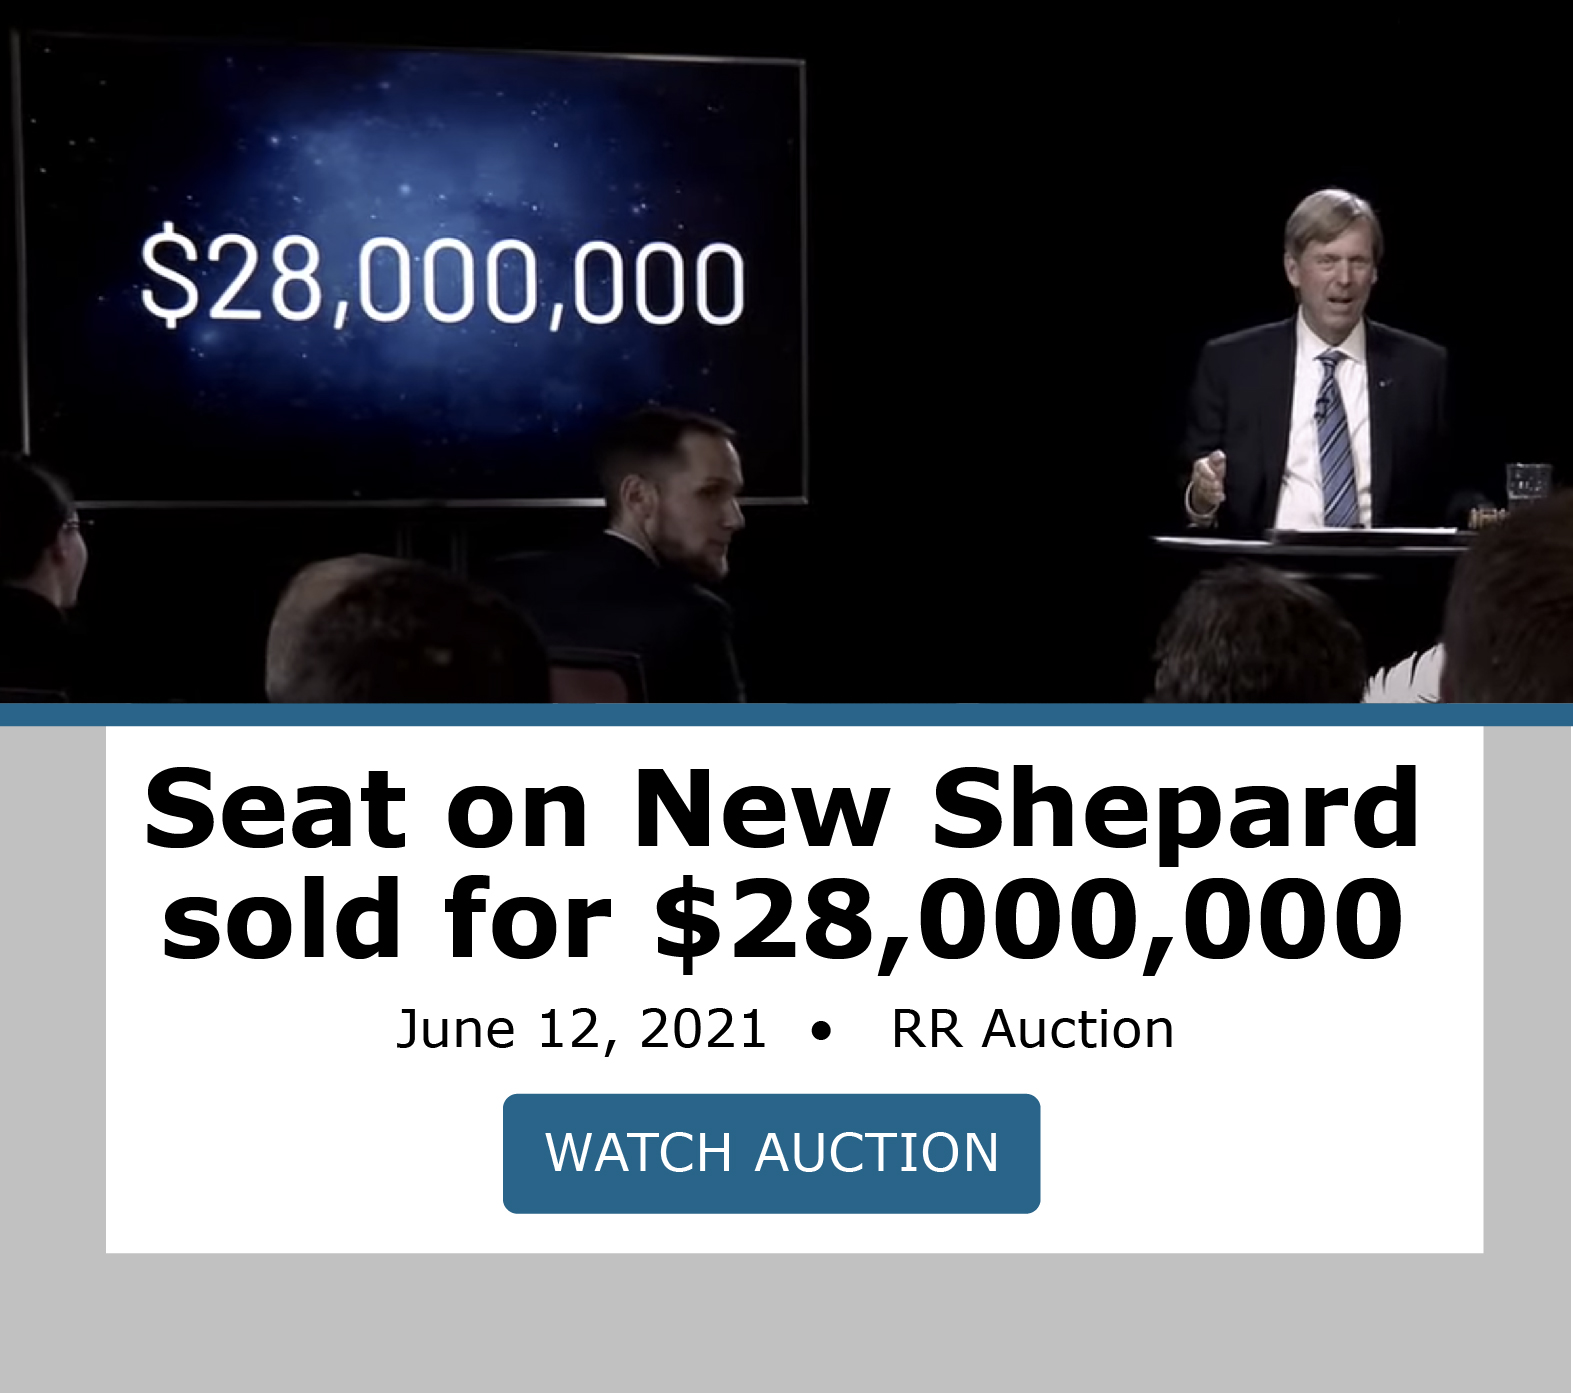 Blue Origin and RR Auction sold a seat on New Shepard for $28,000,000 on June 12, 2021. Watch video of auction now!